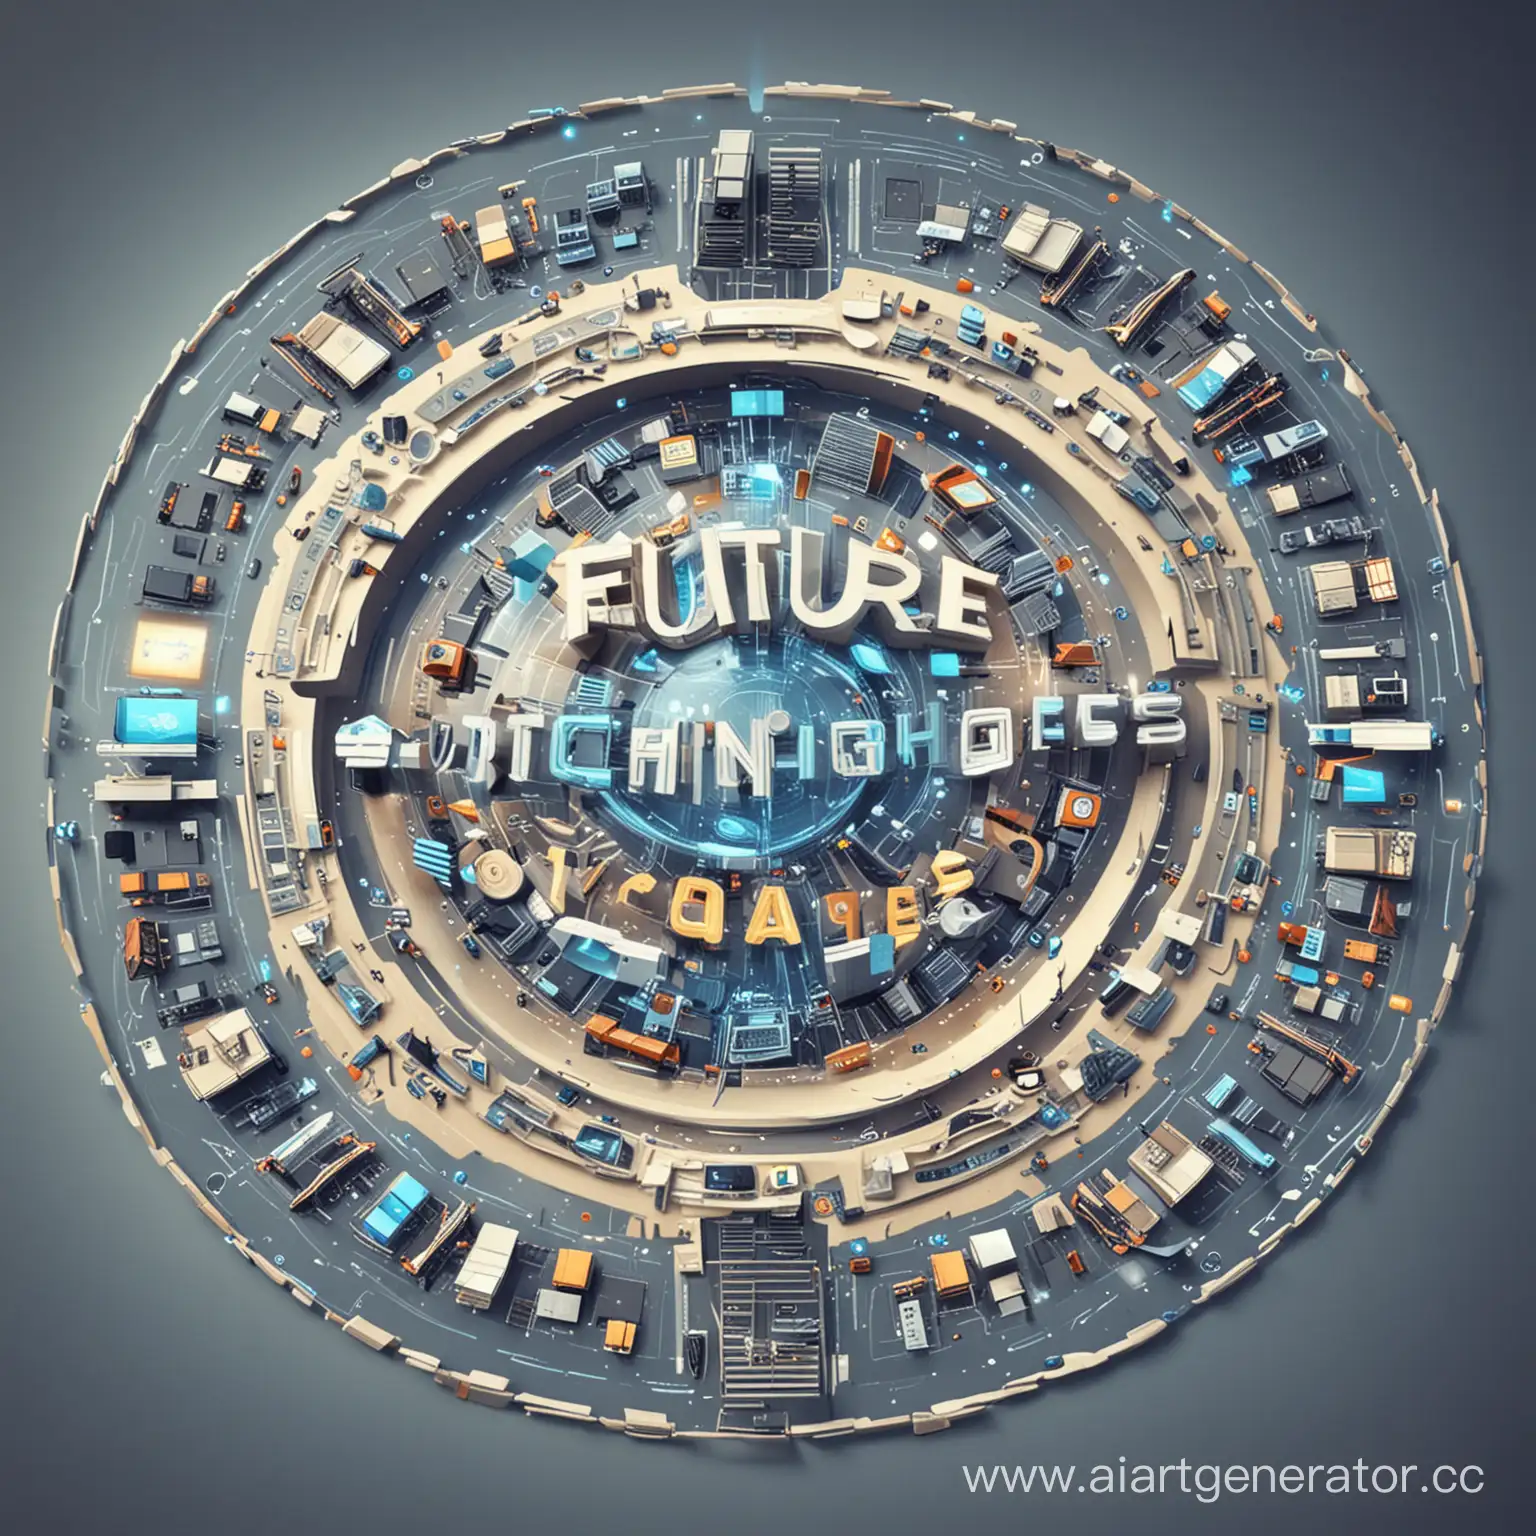 Futuristic-IT-Company-with-Centralized-Technological-Hub